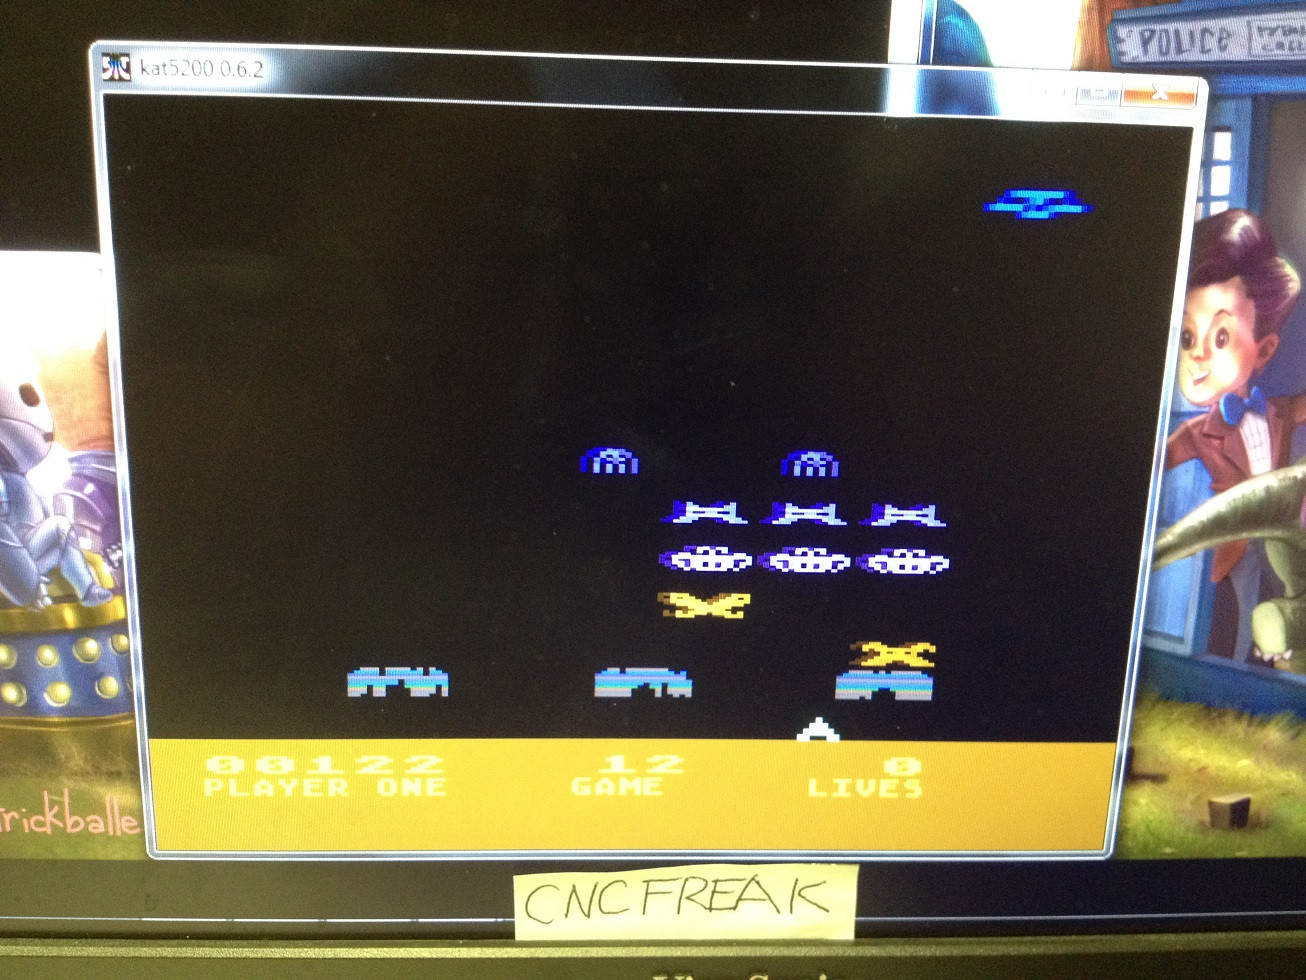 Space Invaders: Game 12 122 points